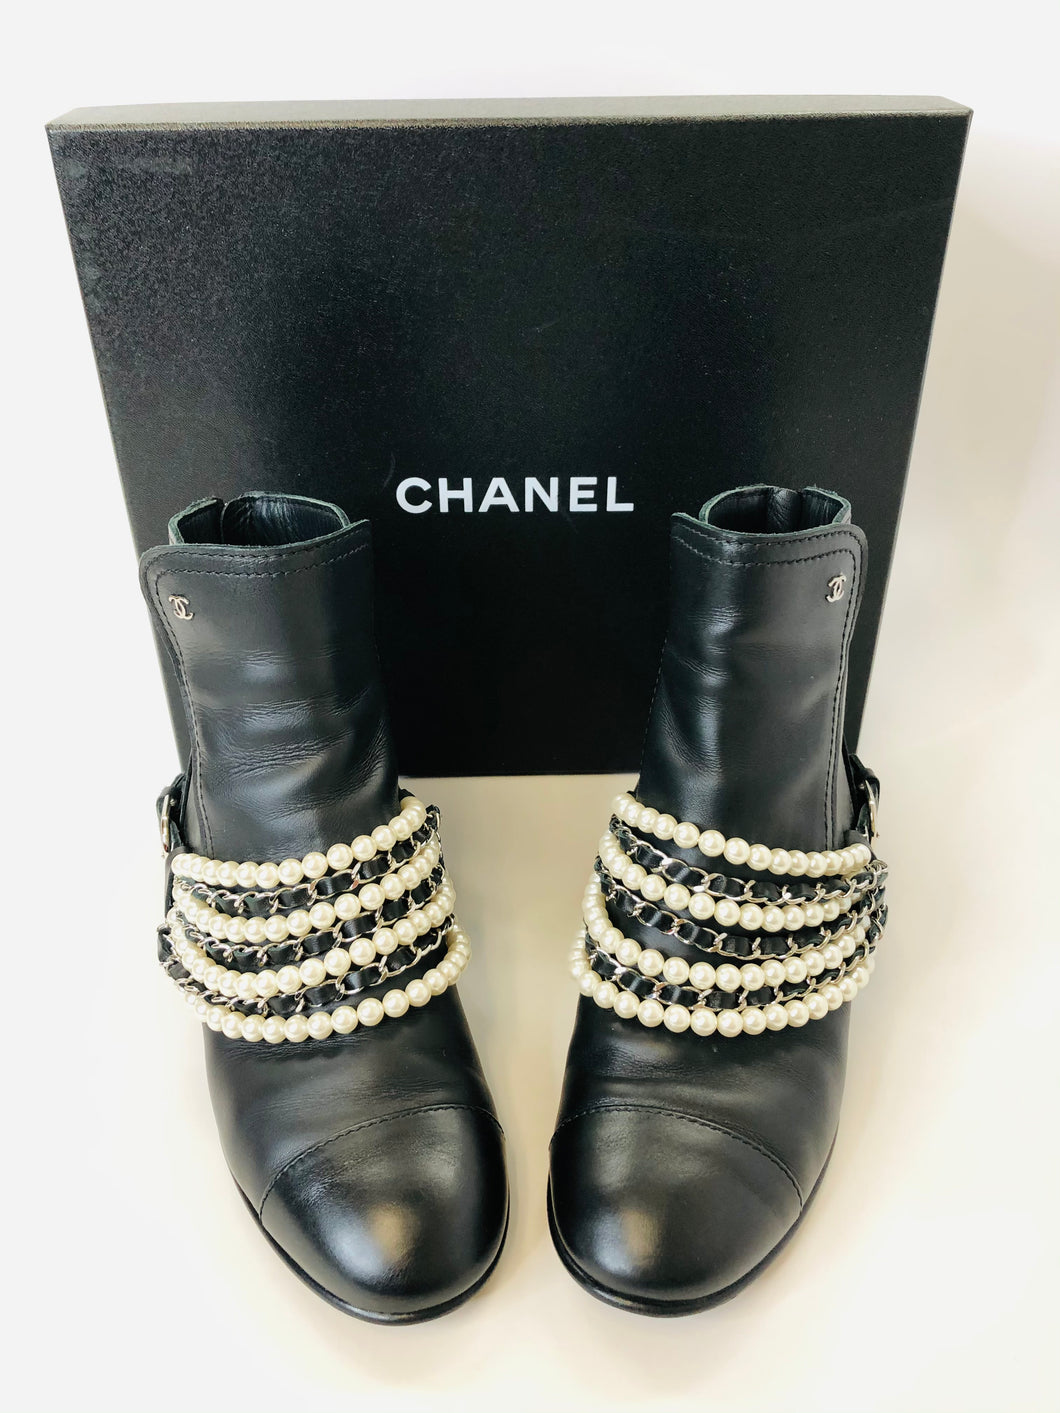 CHANEL Black Calfskin Pearl and Chain Booties Size 37 1/2